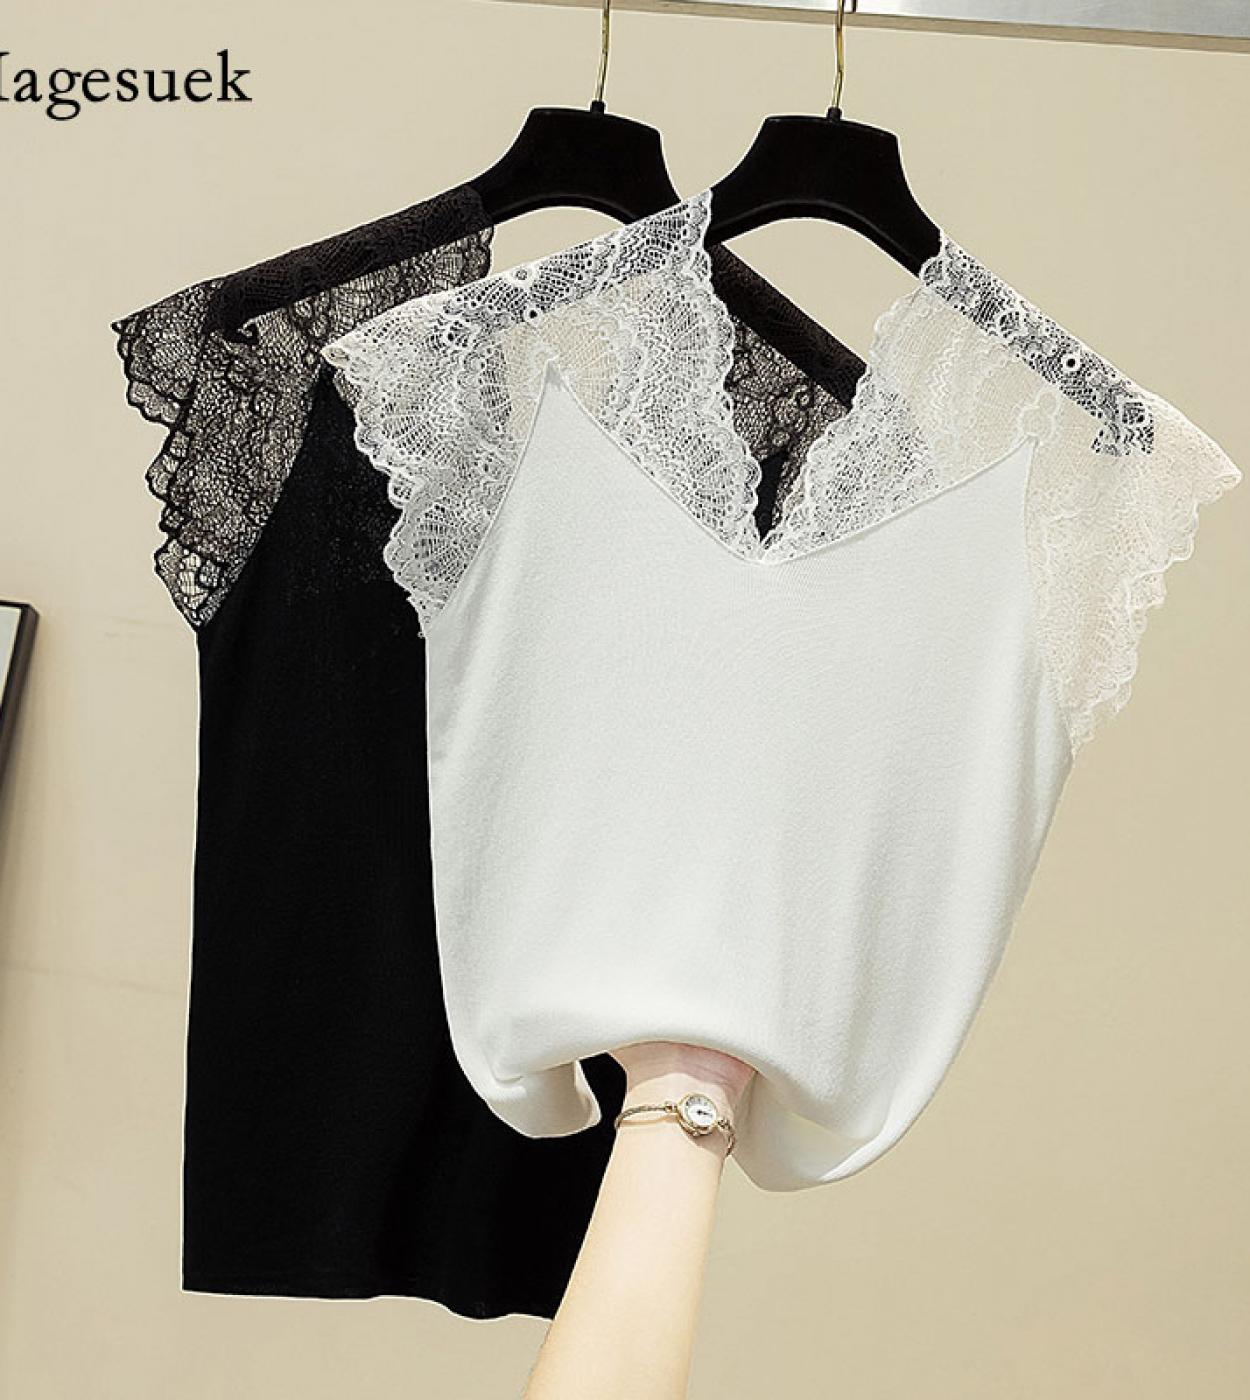  Lace Stitching Knitted Tank Tops V Neck Ice Silk Summer Blouse Women Slim Vest Fashion Sleeveless Bottoming Tee Shirt 1